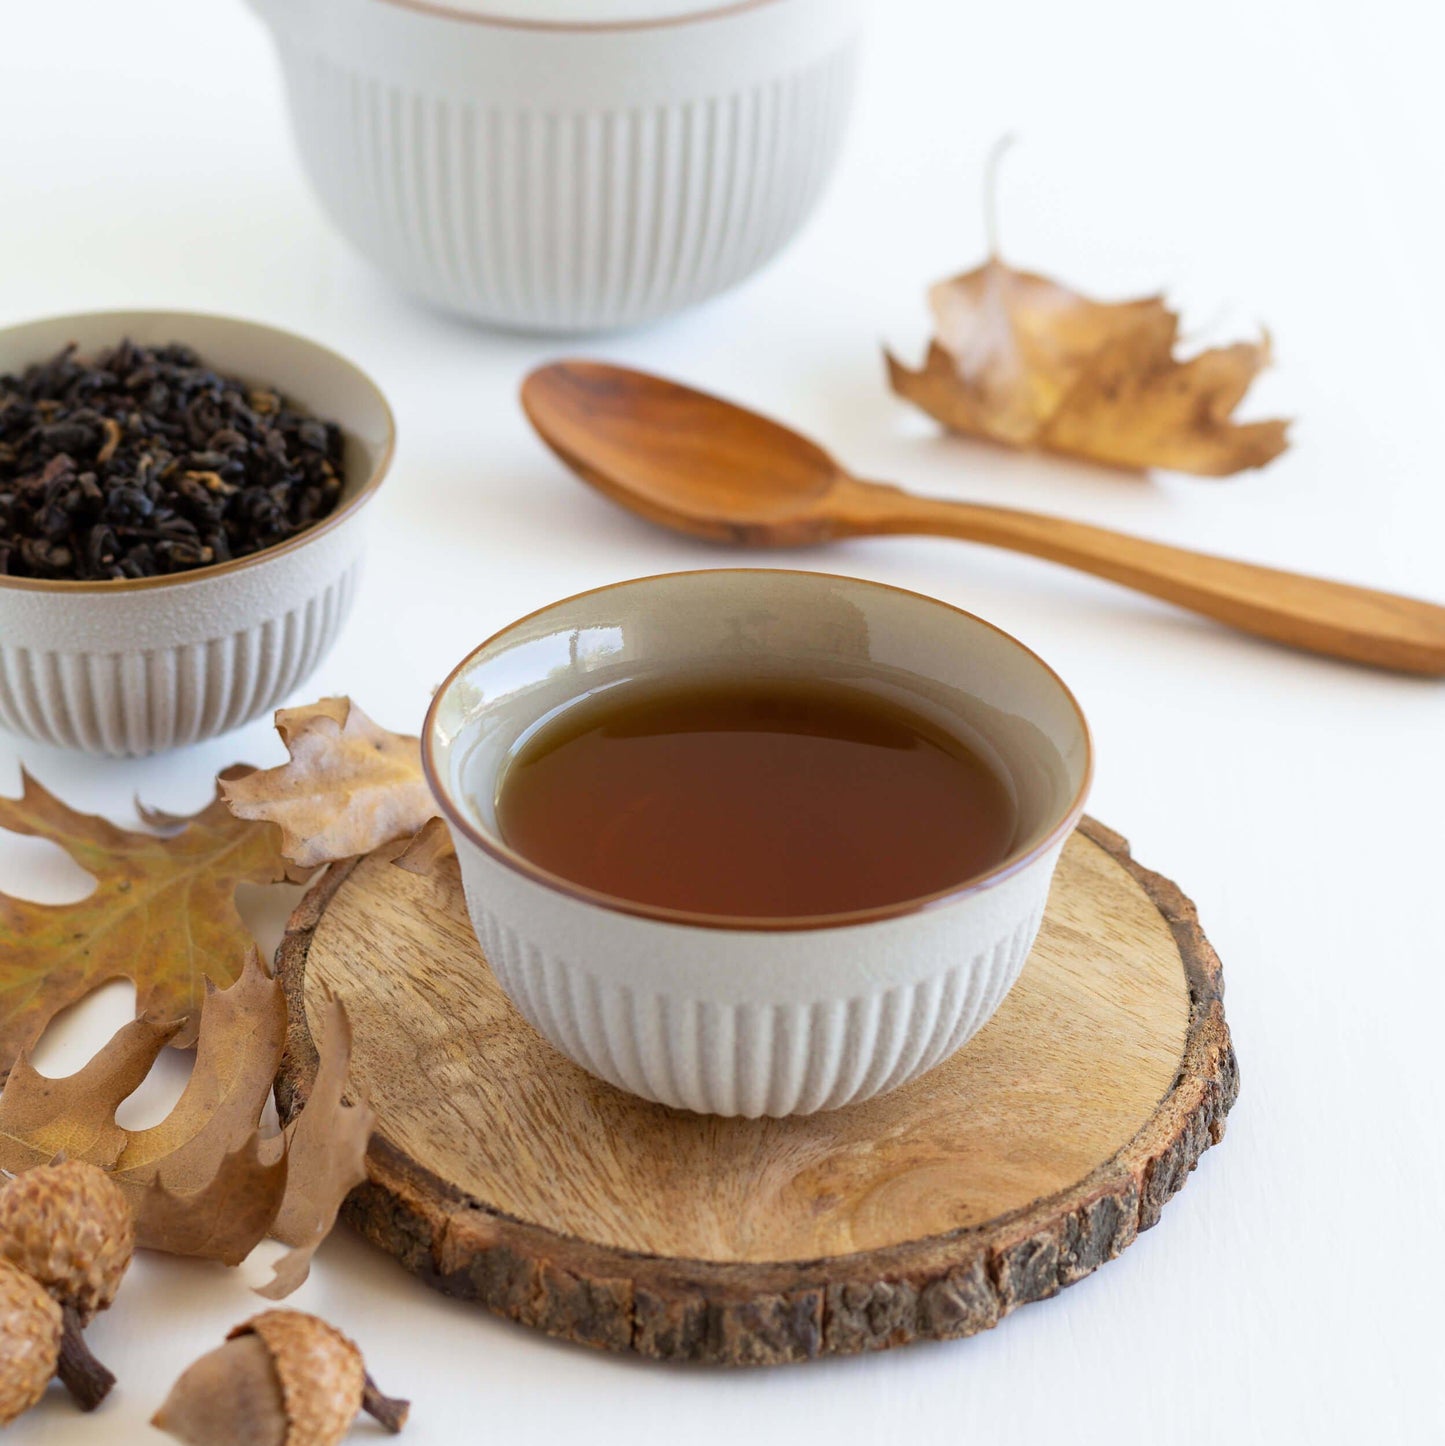 Amber Autumn Oolong shown as brewed tea in a small white cup on a wooden coaster, with acorns, brown tree leaves, and a wooden spoon nearby.